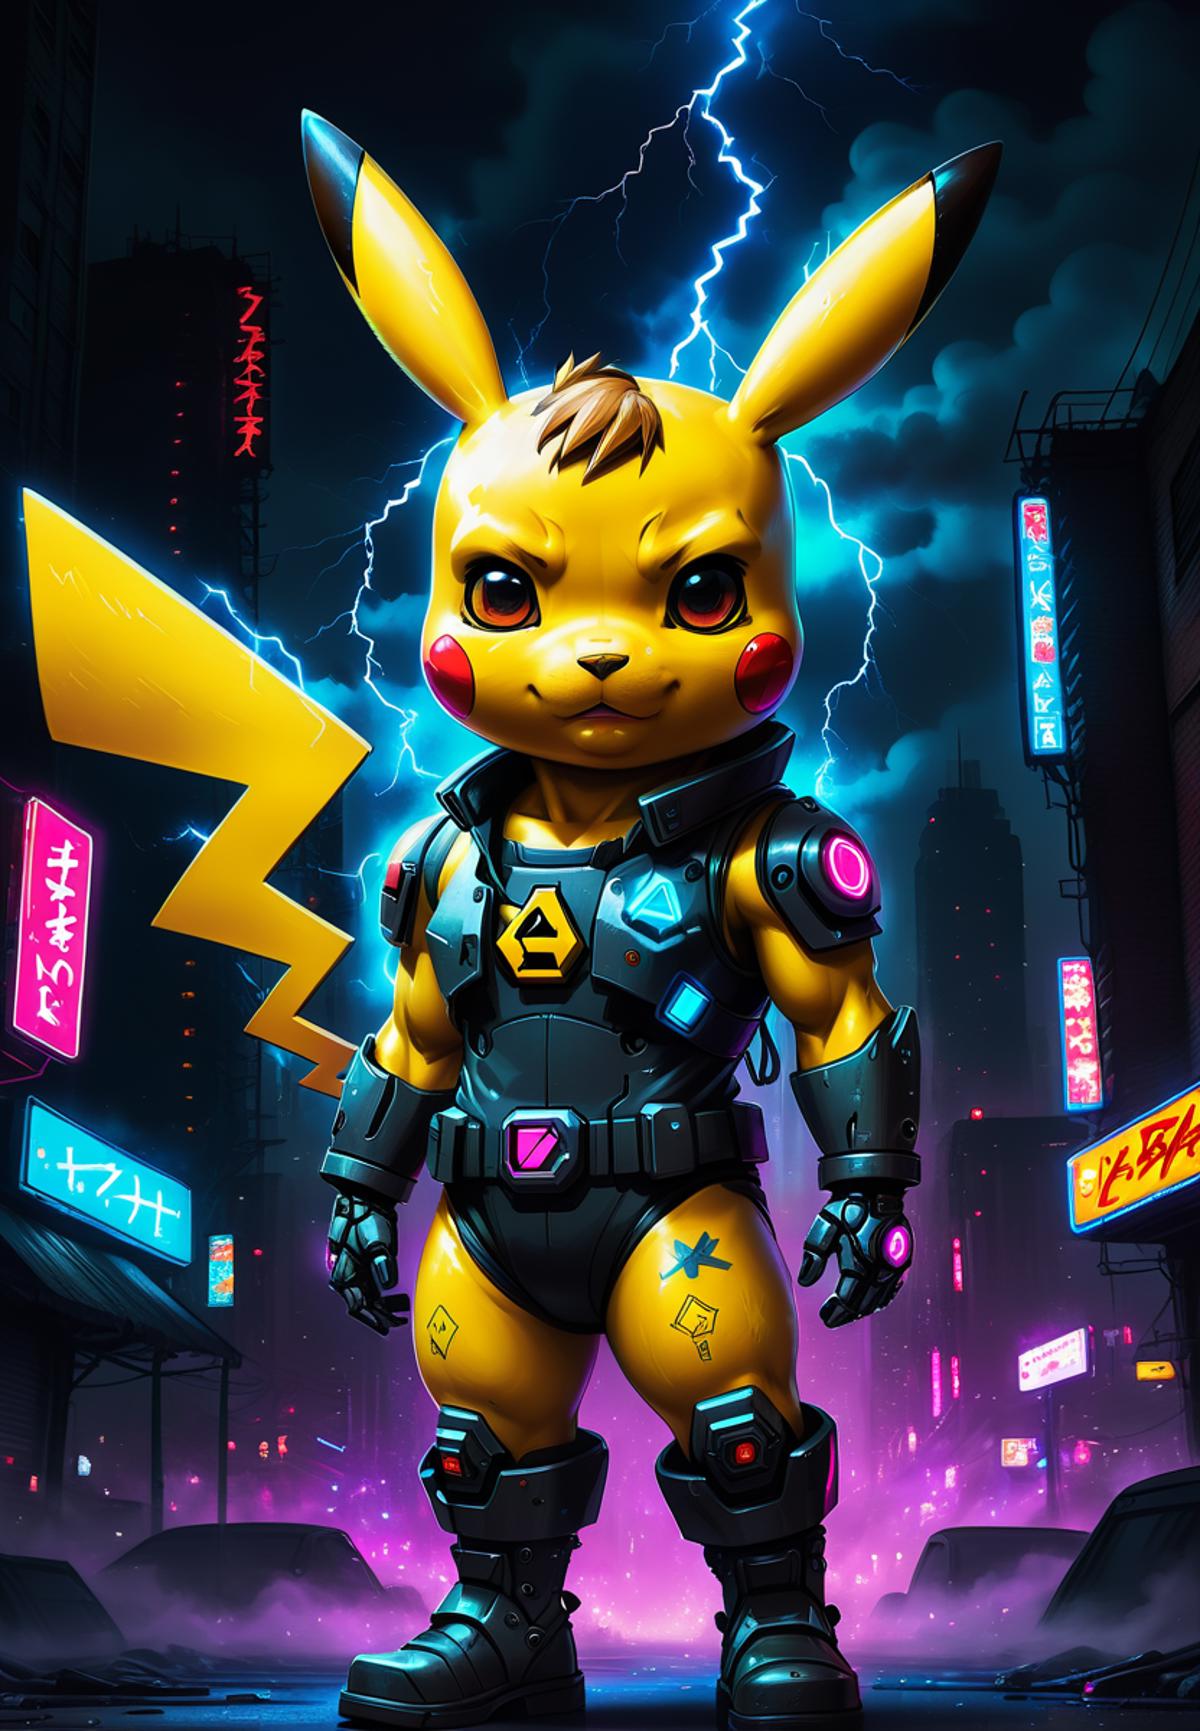 A Pikachu Action Figure in a Black Suit and Gloves.